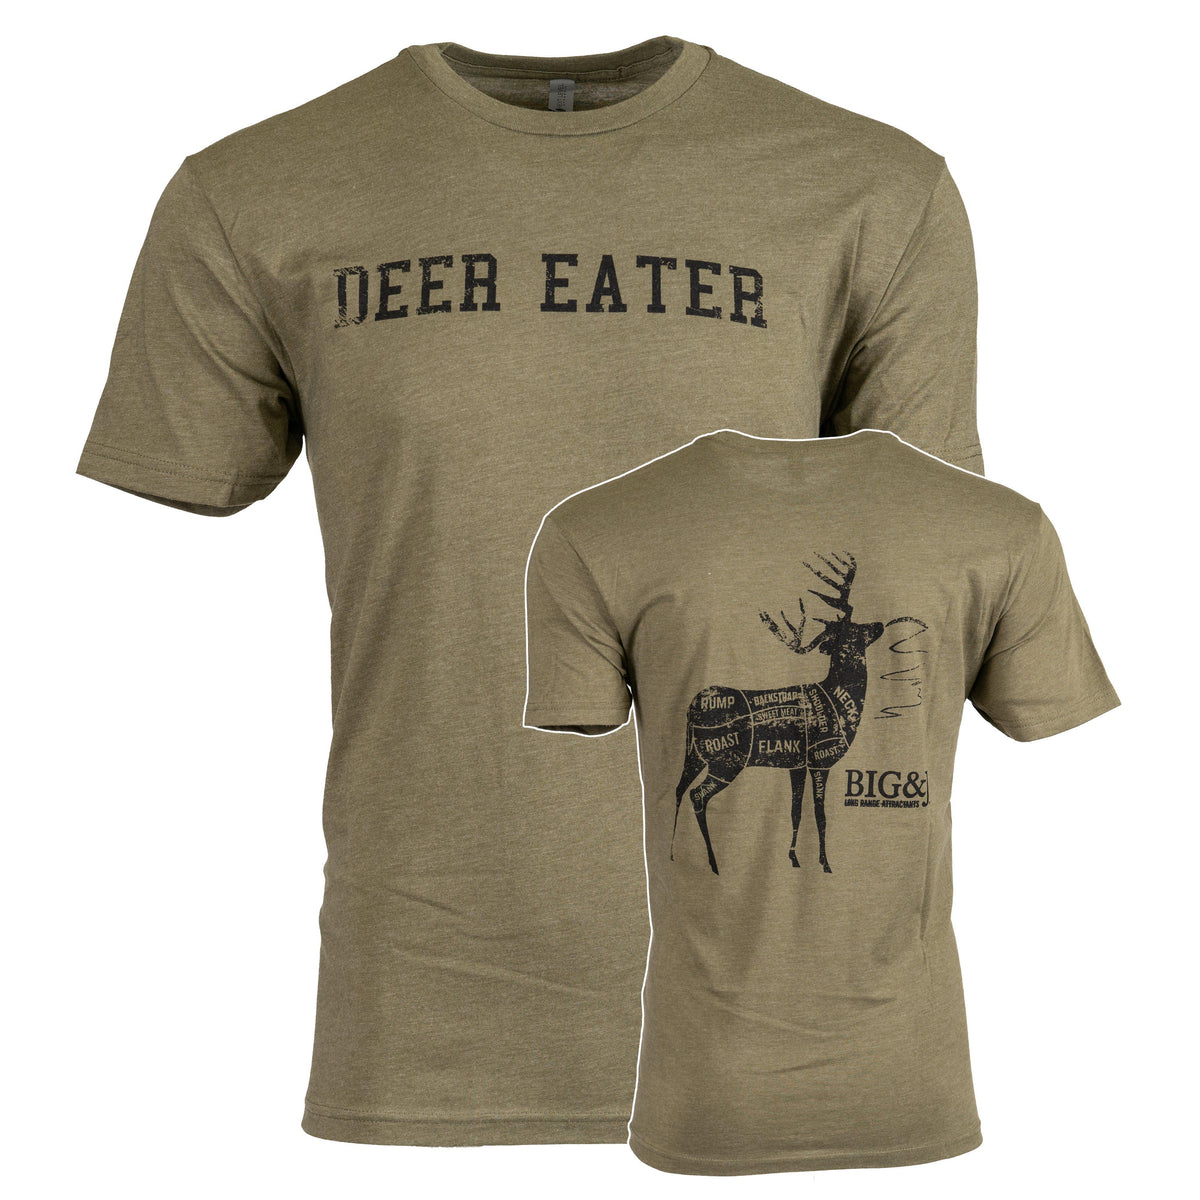 Military Green with Black Lettering Deer Eater Shirt